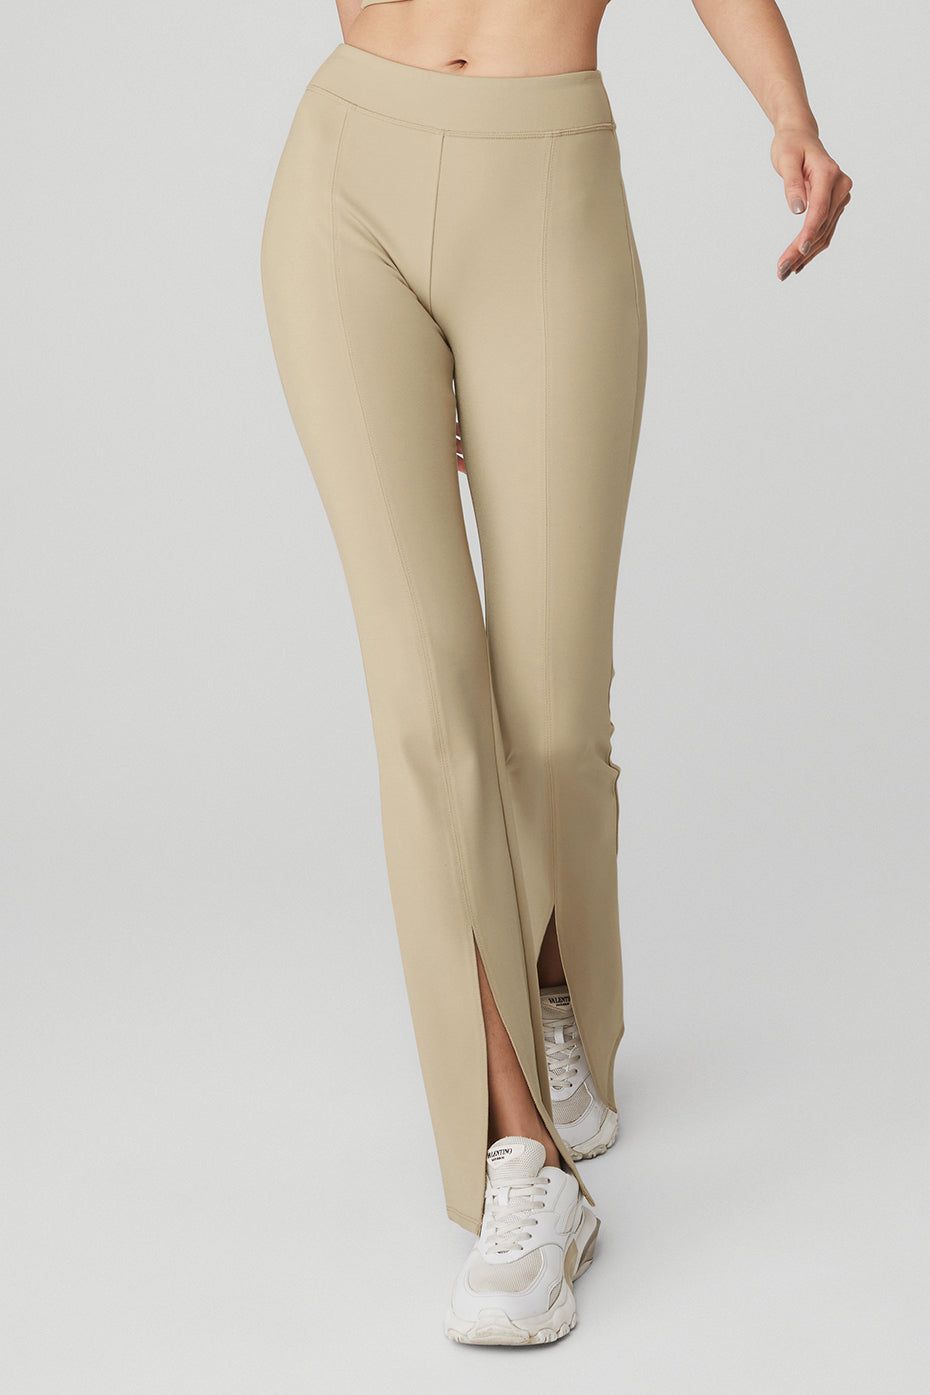 Airbrush High-Waist V Cut 7/8 Bootcut Flared Pant With Side Pocket